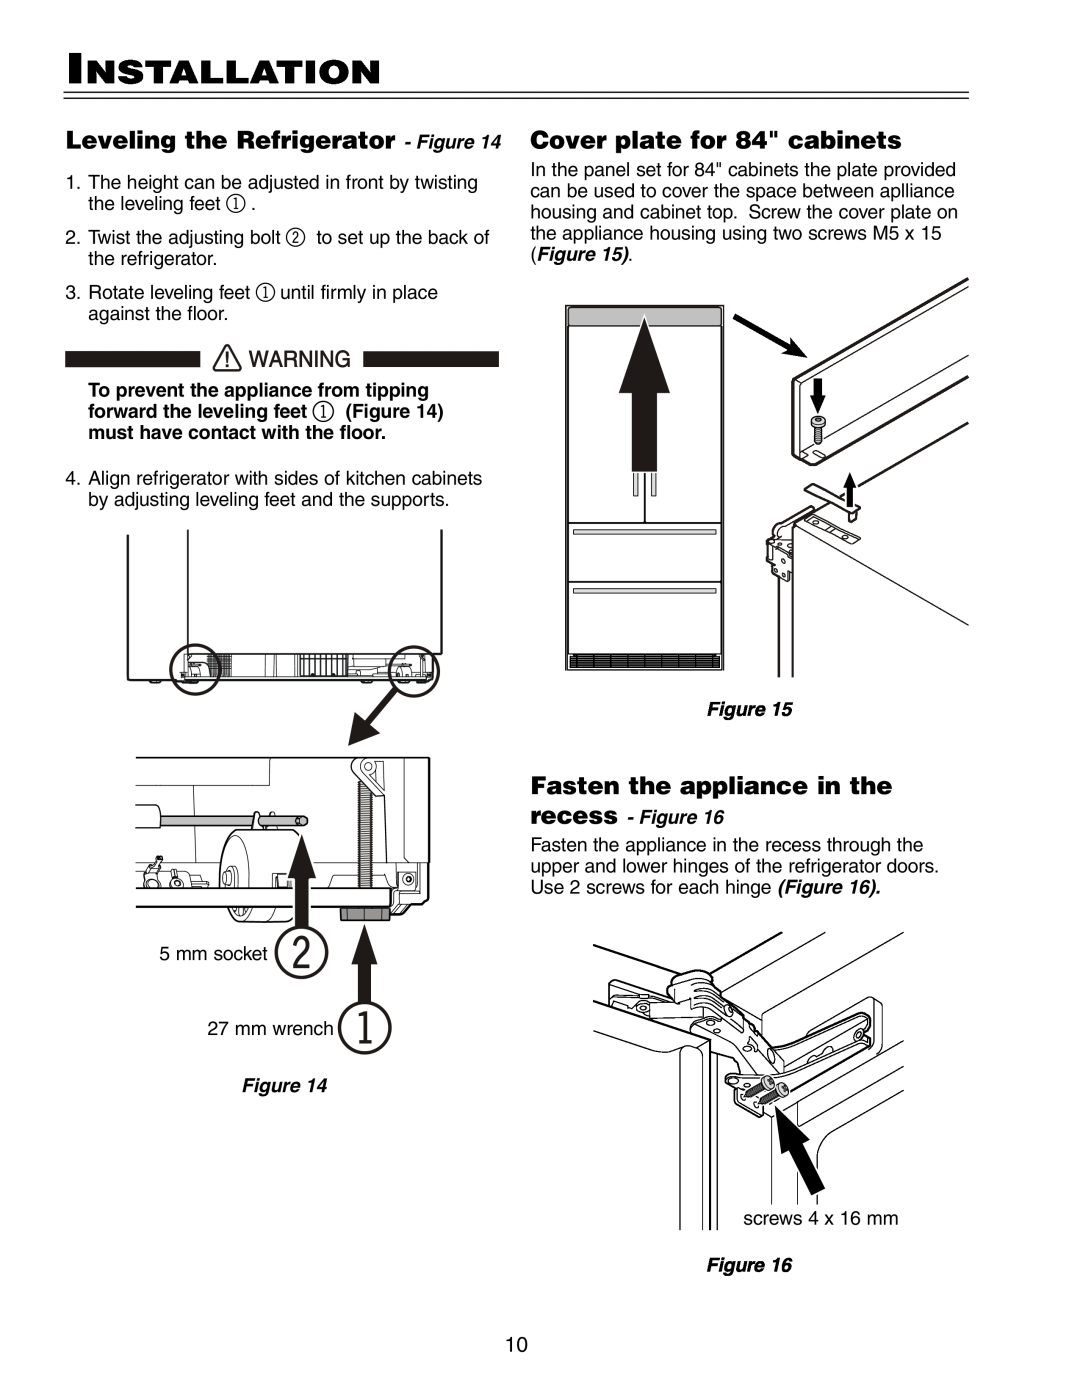 Liebherr HCS 20 installation instructions Installation, Leveling the Refrigerator - Figure, Cover plate for 84 cabinets 